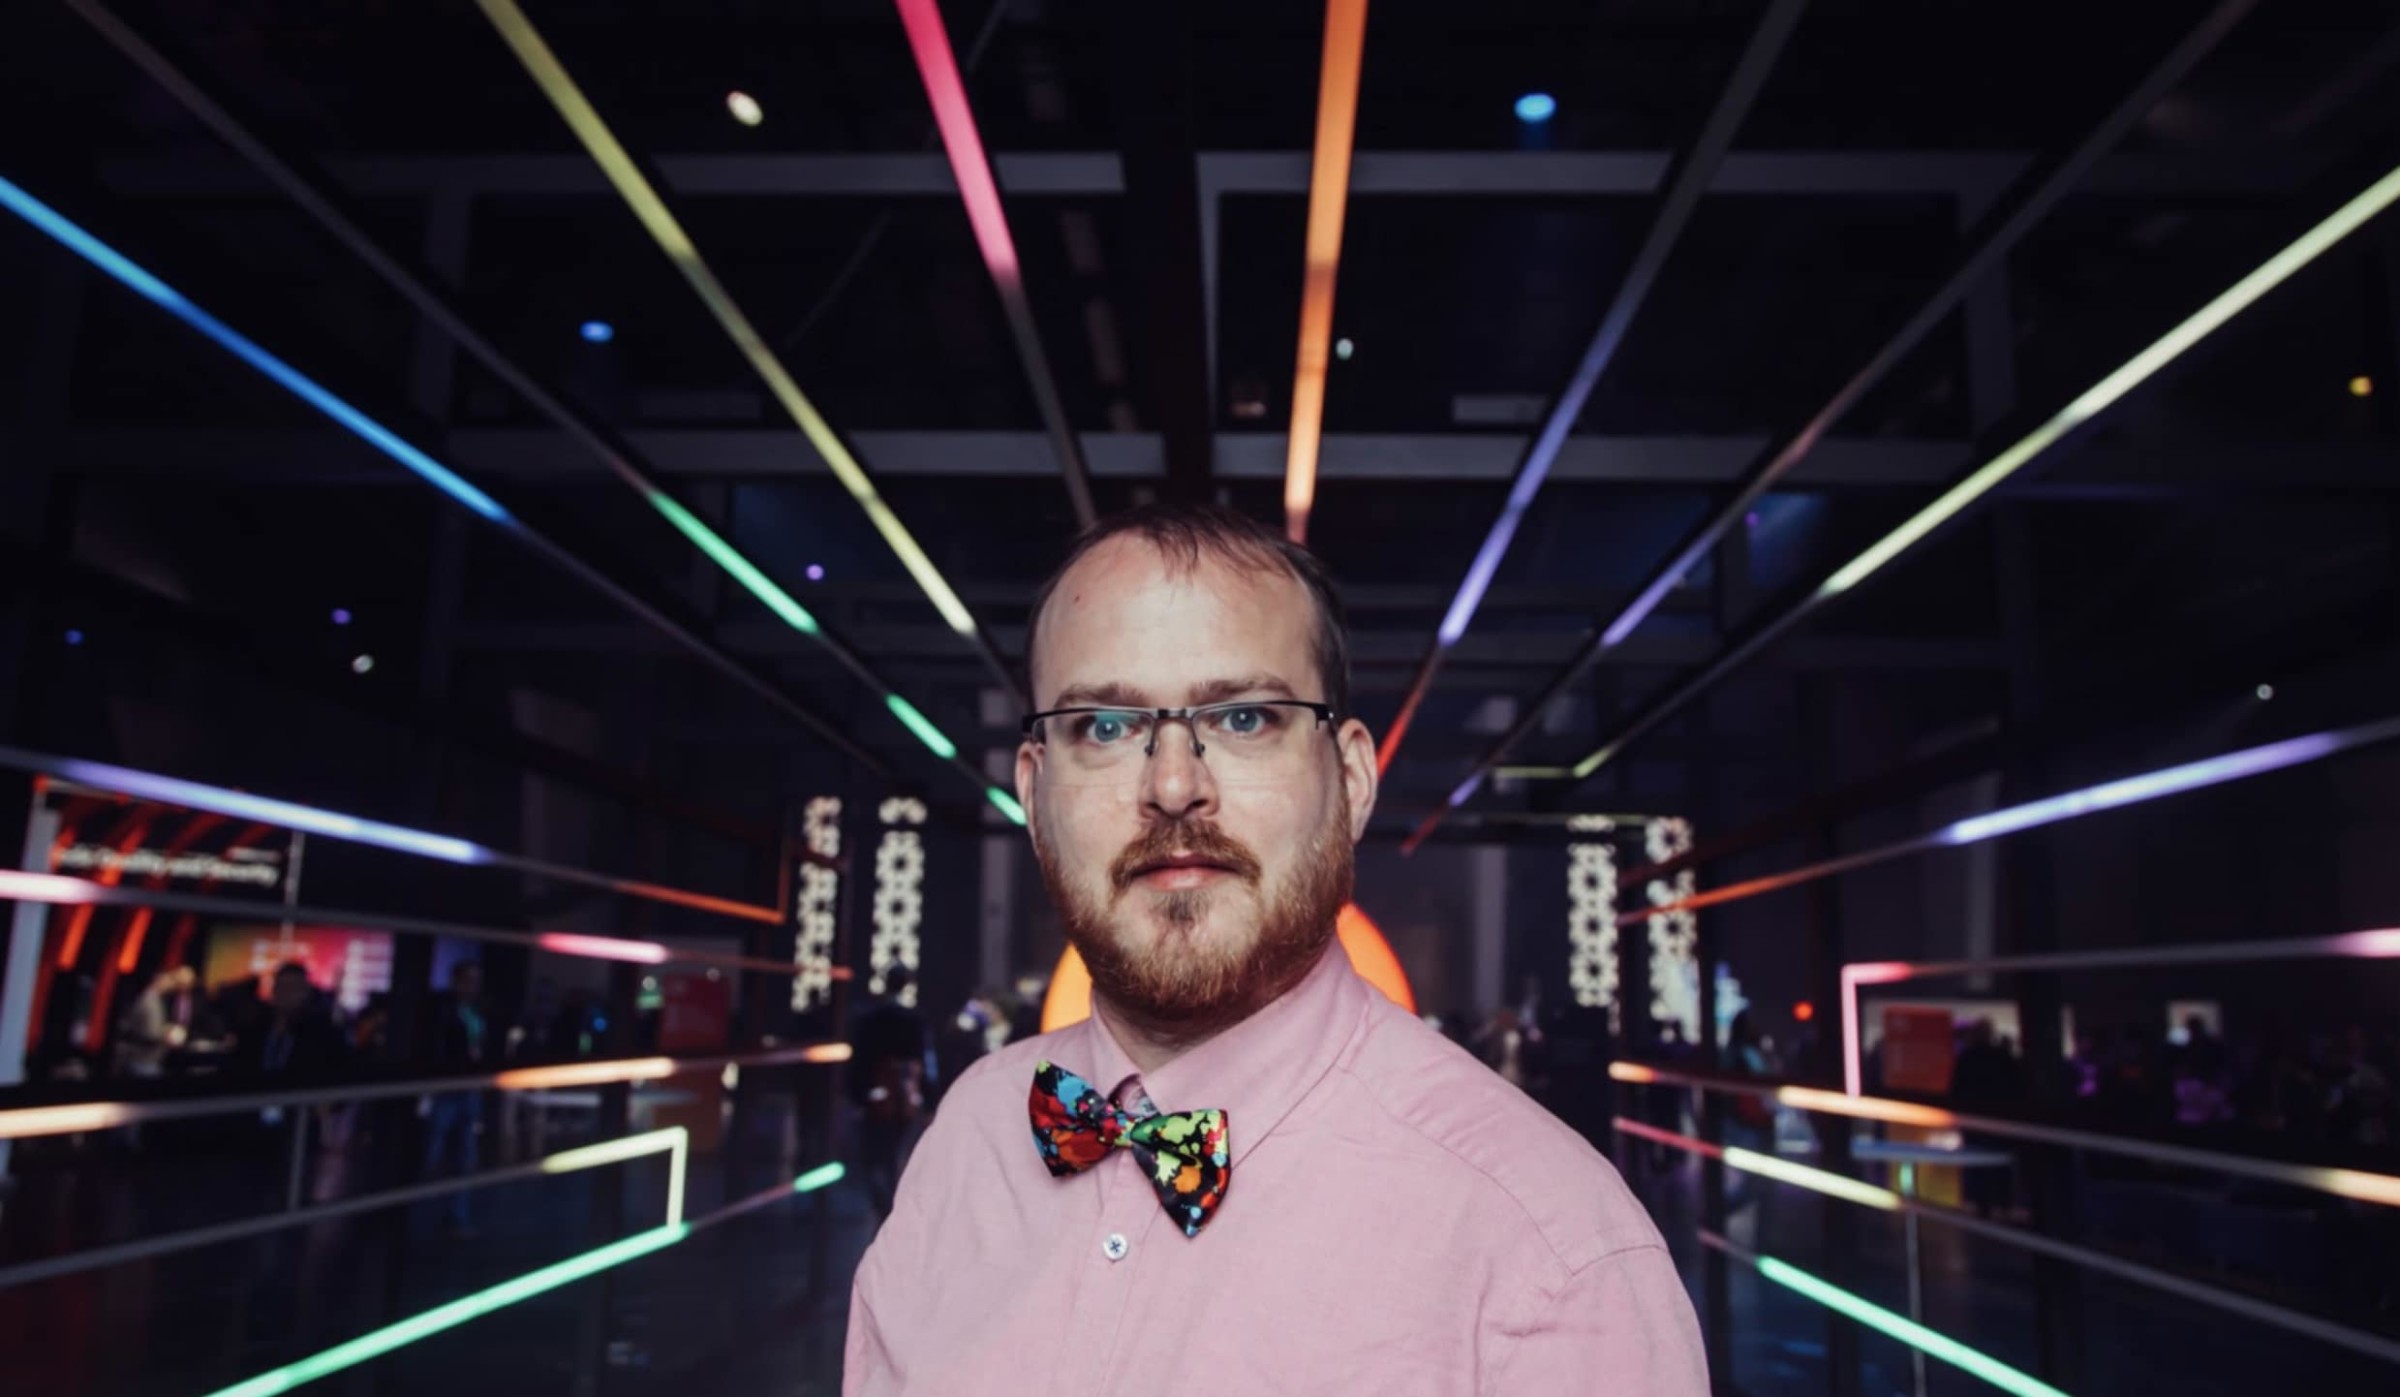 Photo of Dirk Lemstra wearing a colorful bowtie, surrounded by colorful lighted leading lines.